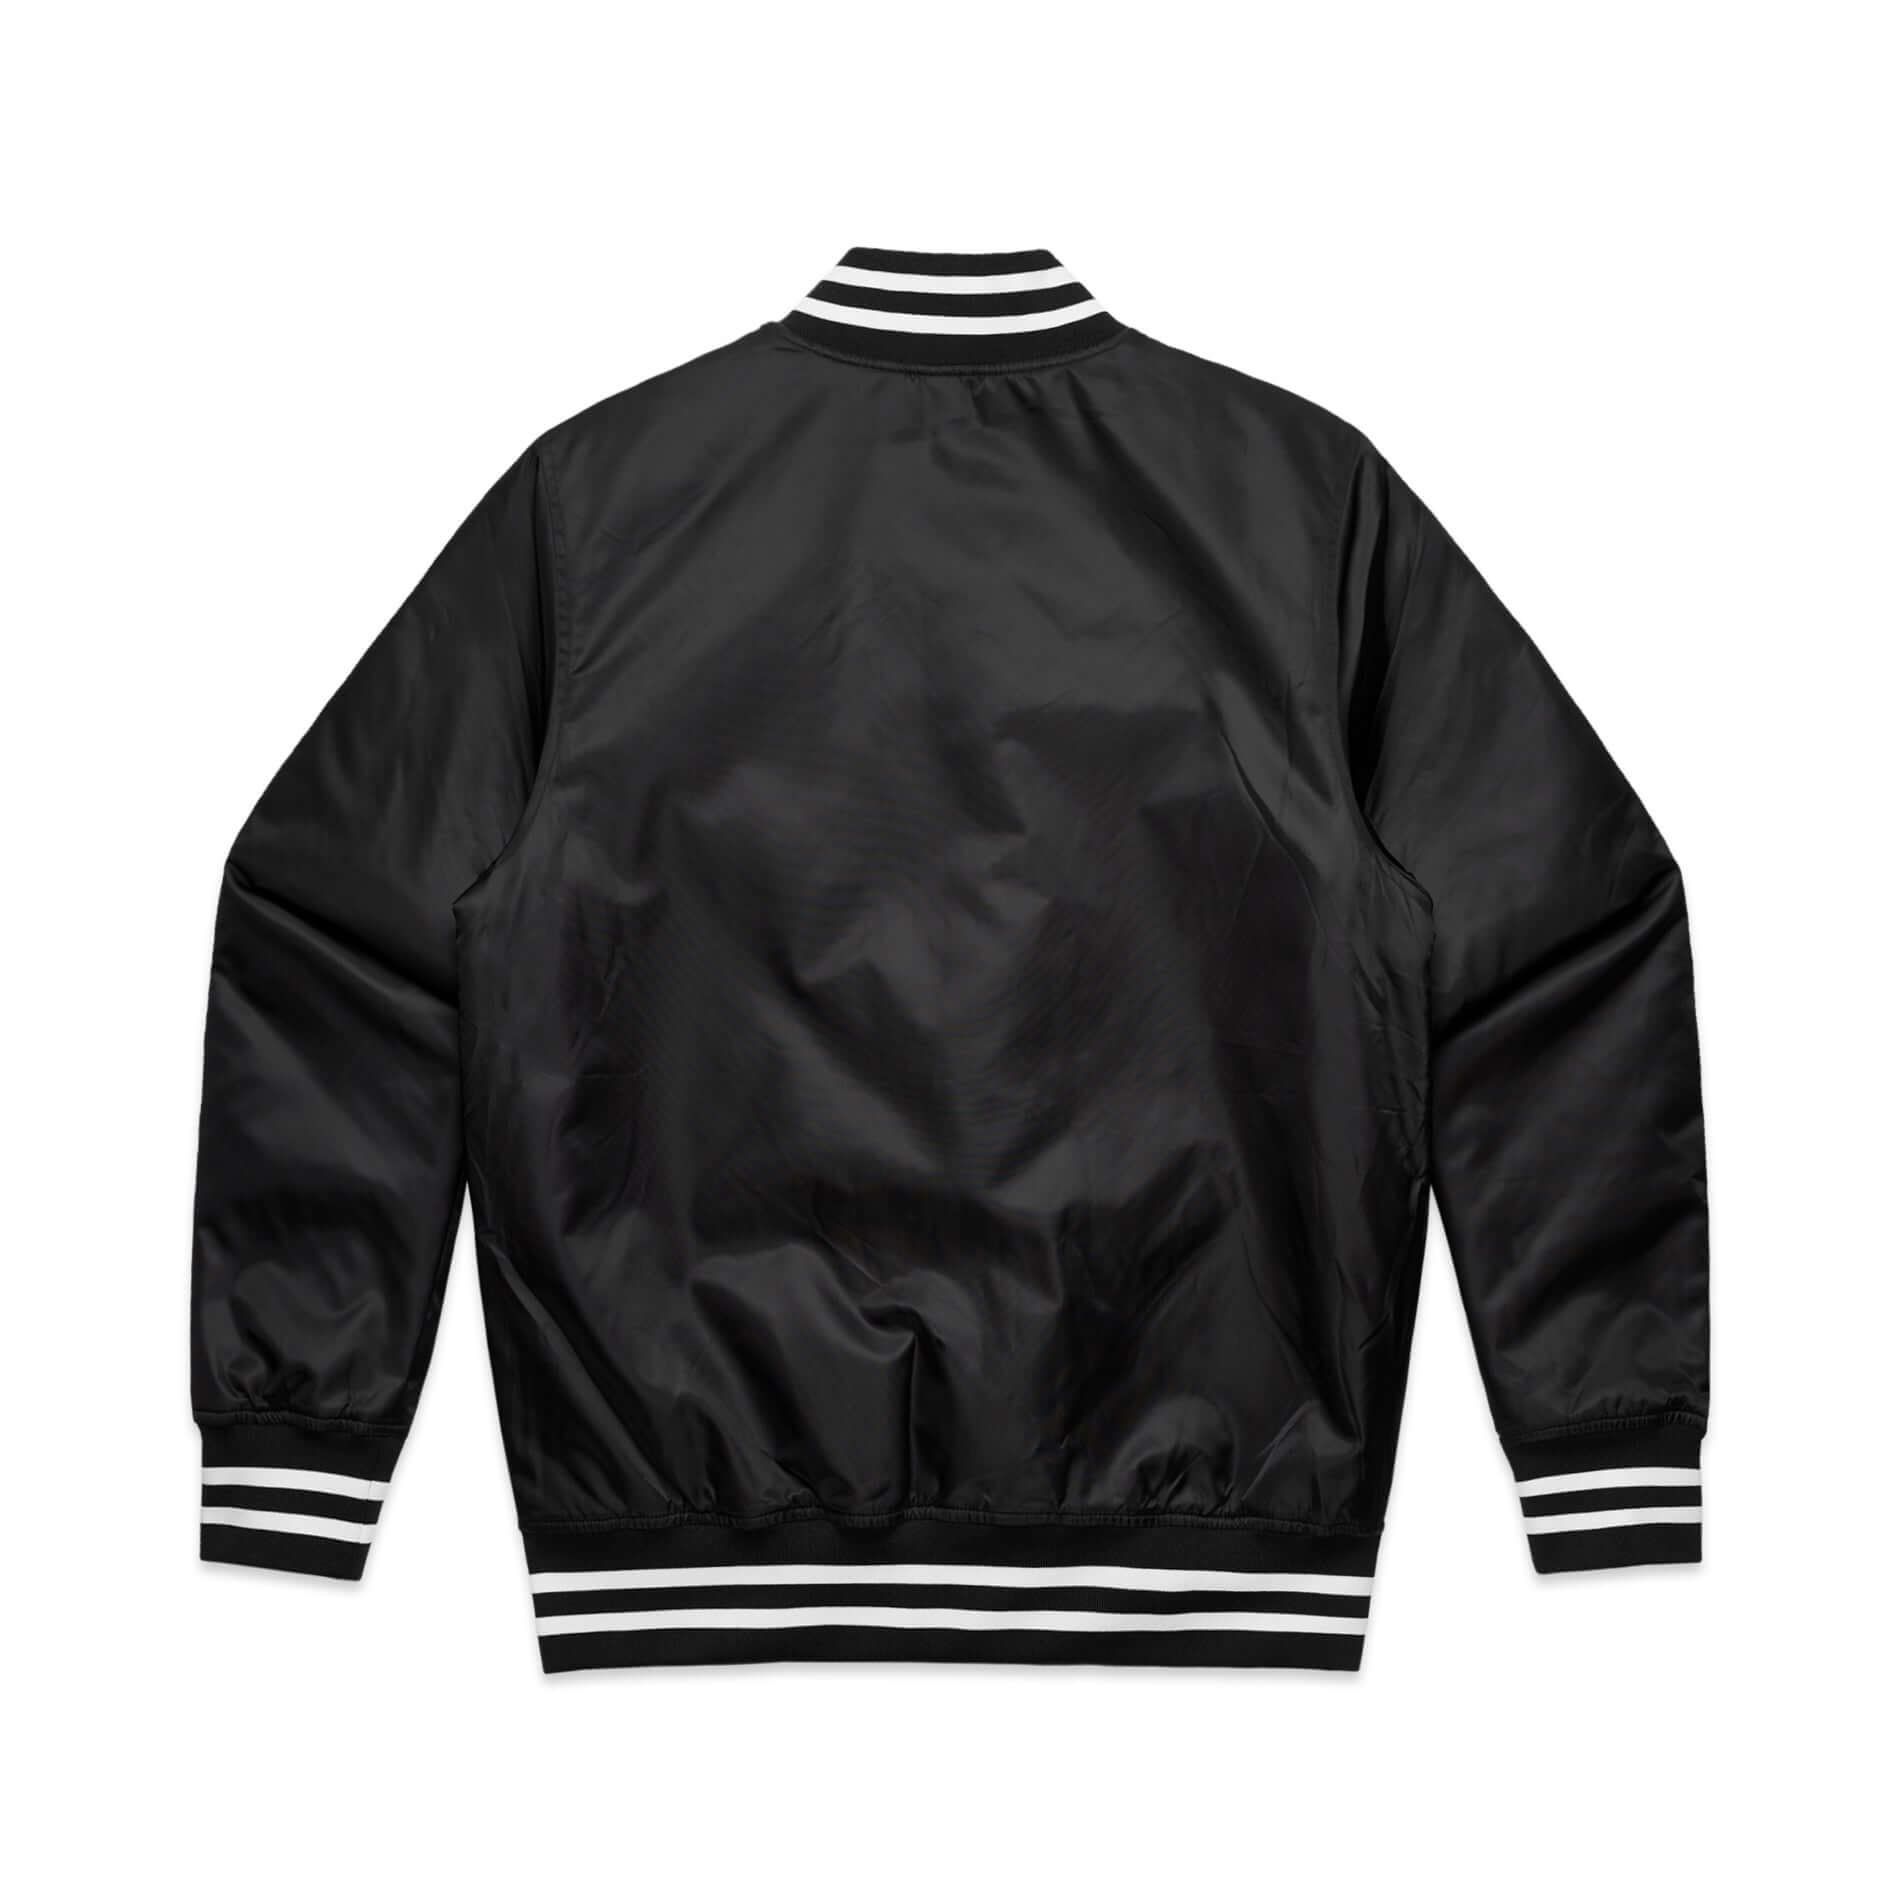 AS Colour COLLEGE BOMBER JACKET - Black